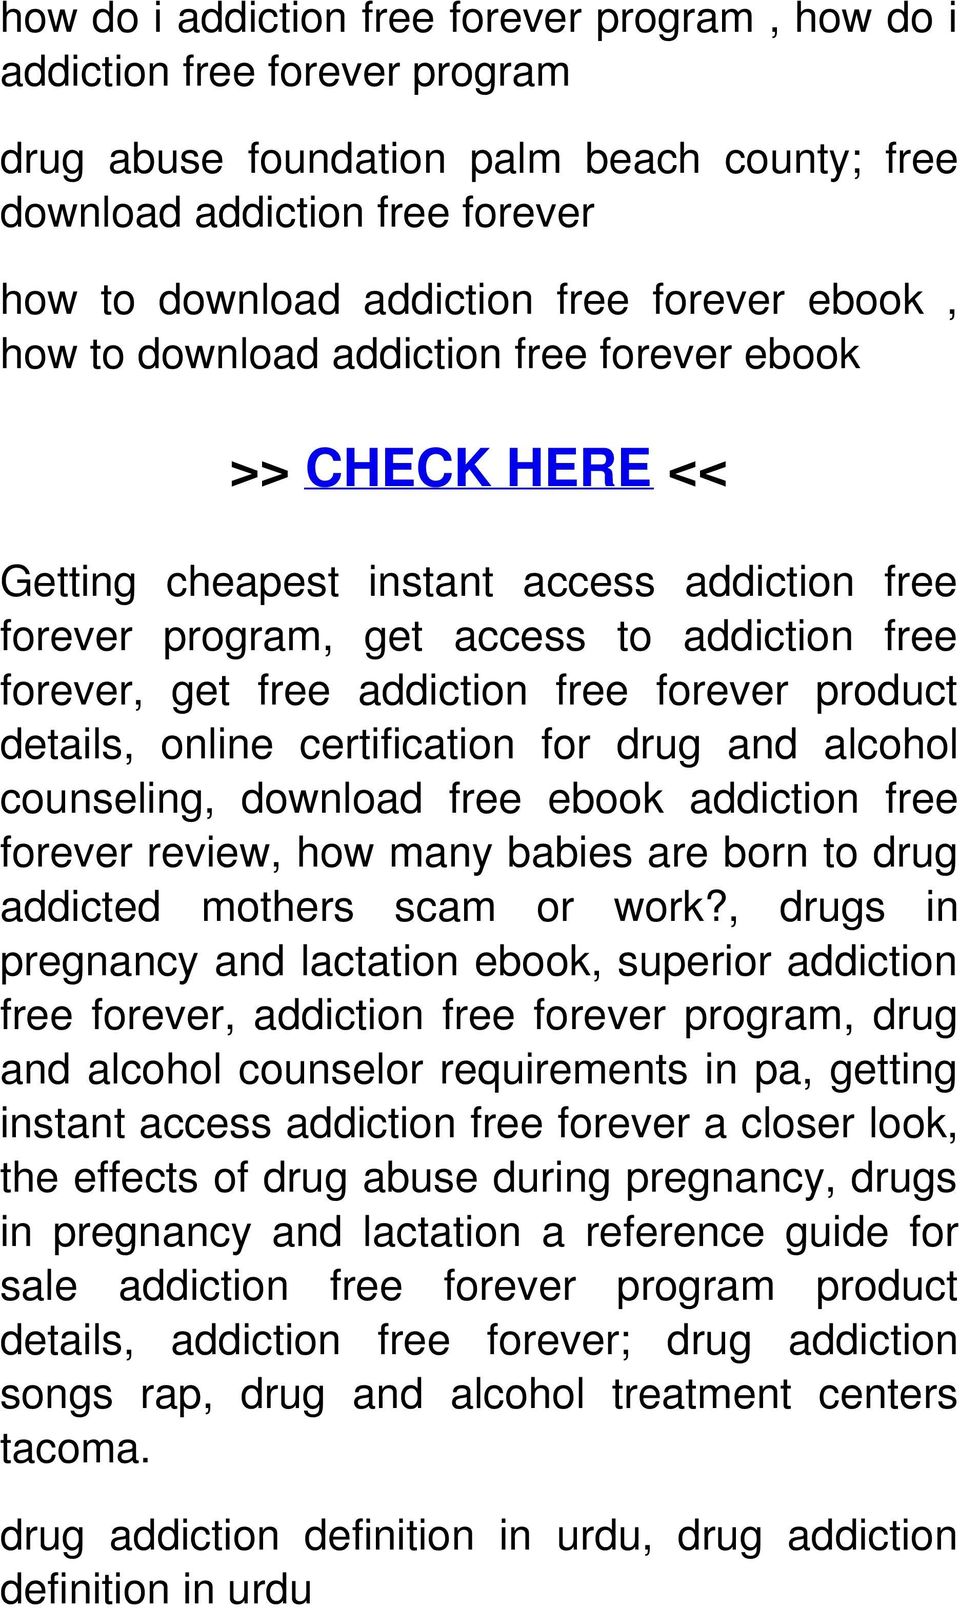 forever product details, online certification for drug and alcohol counseling, download free ebook addiction free forever review, how many babies are born to drug addicted mothers scam or work?